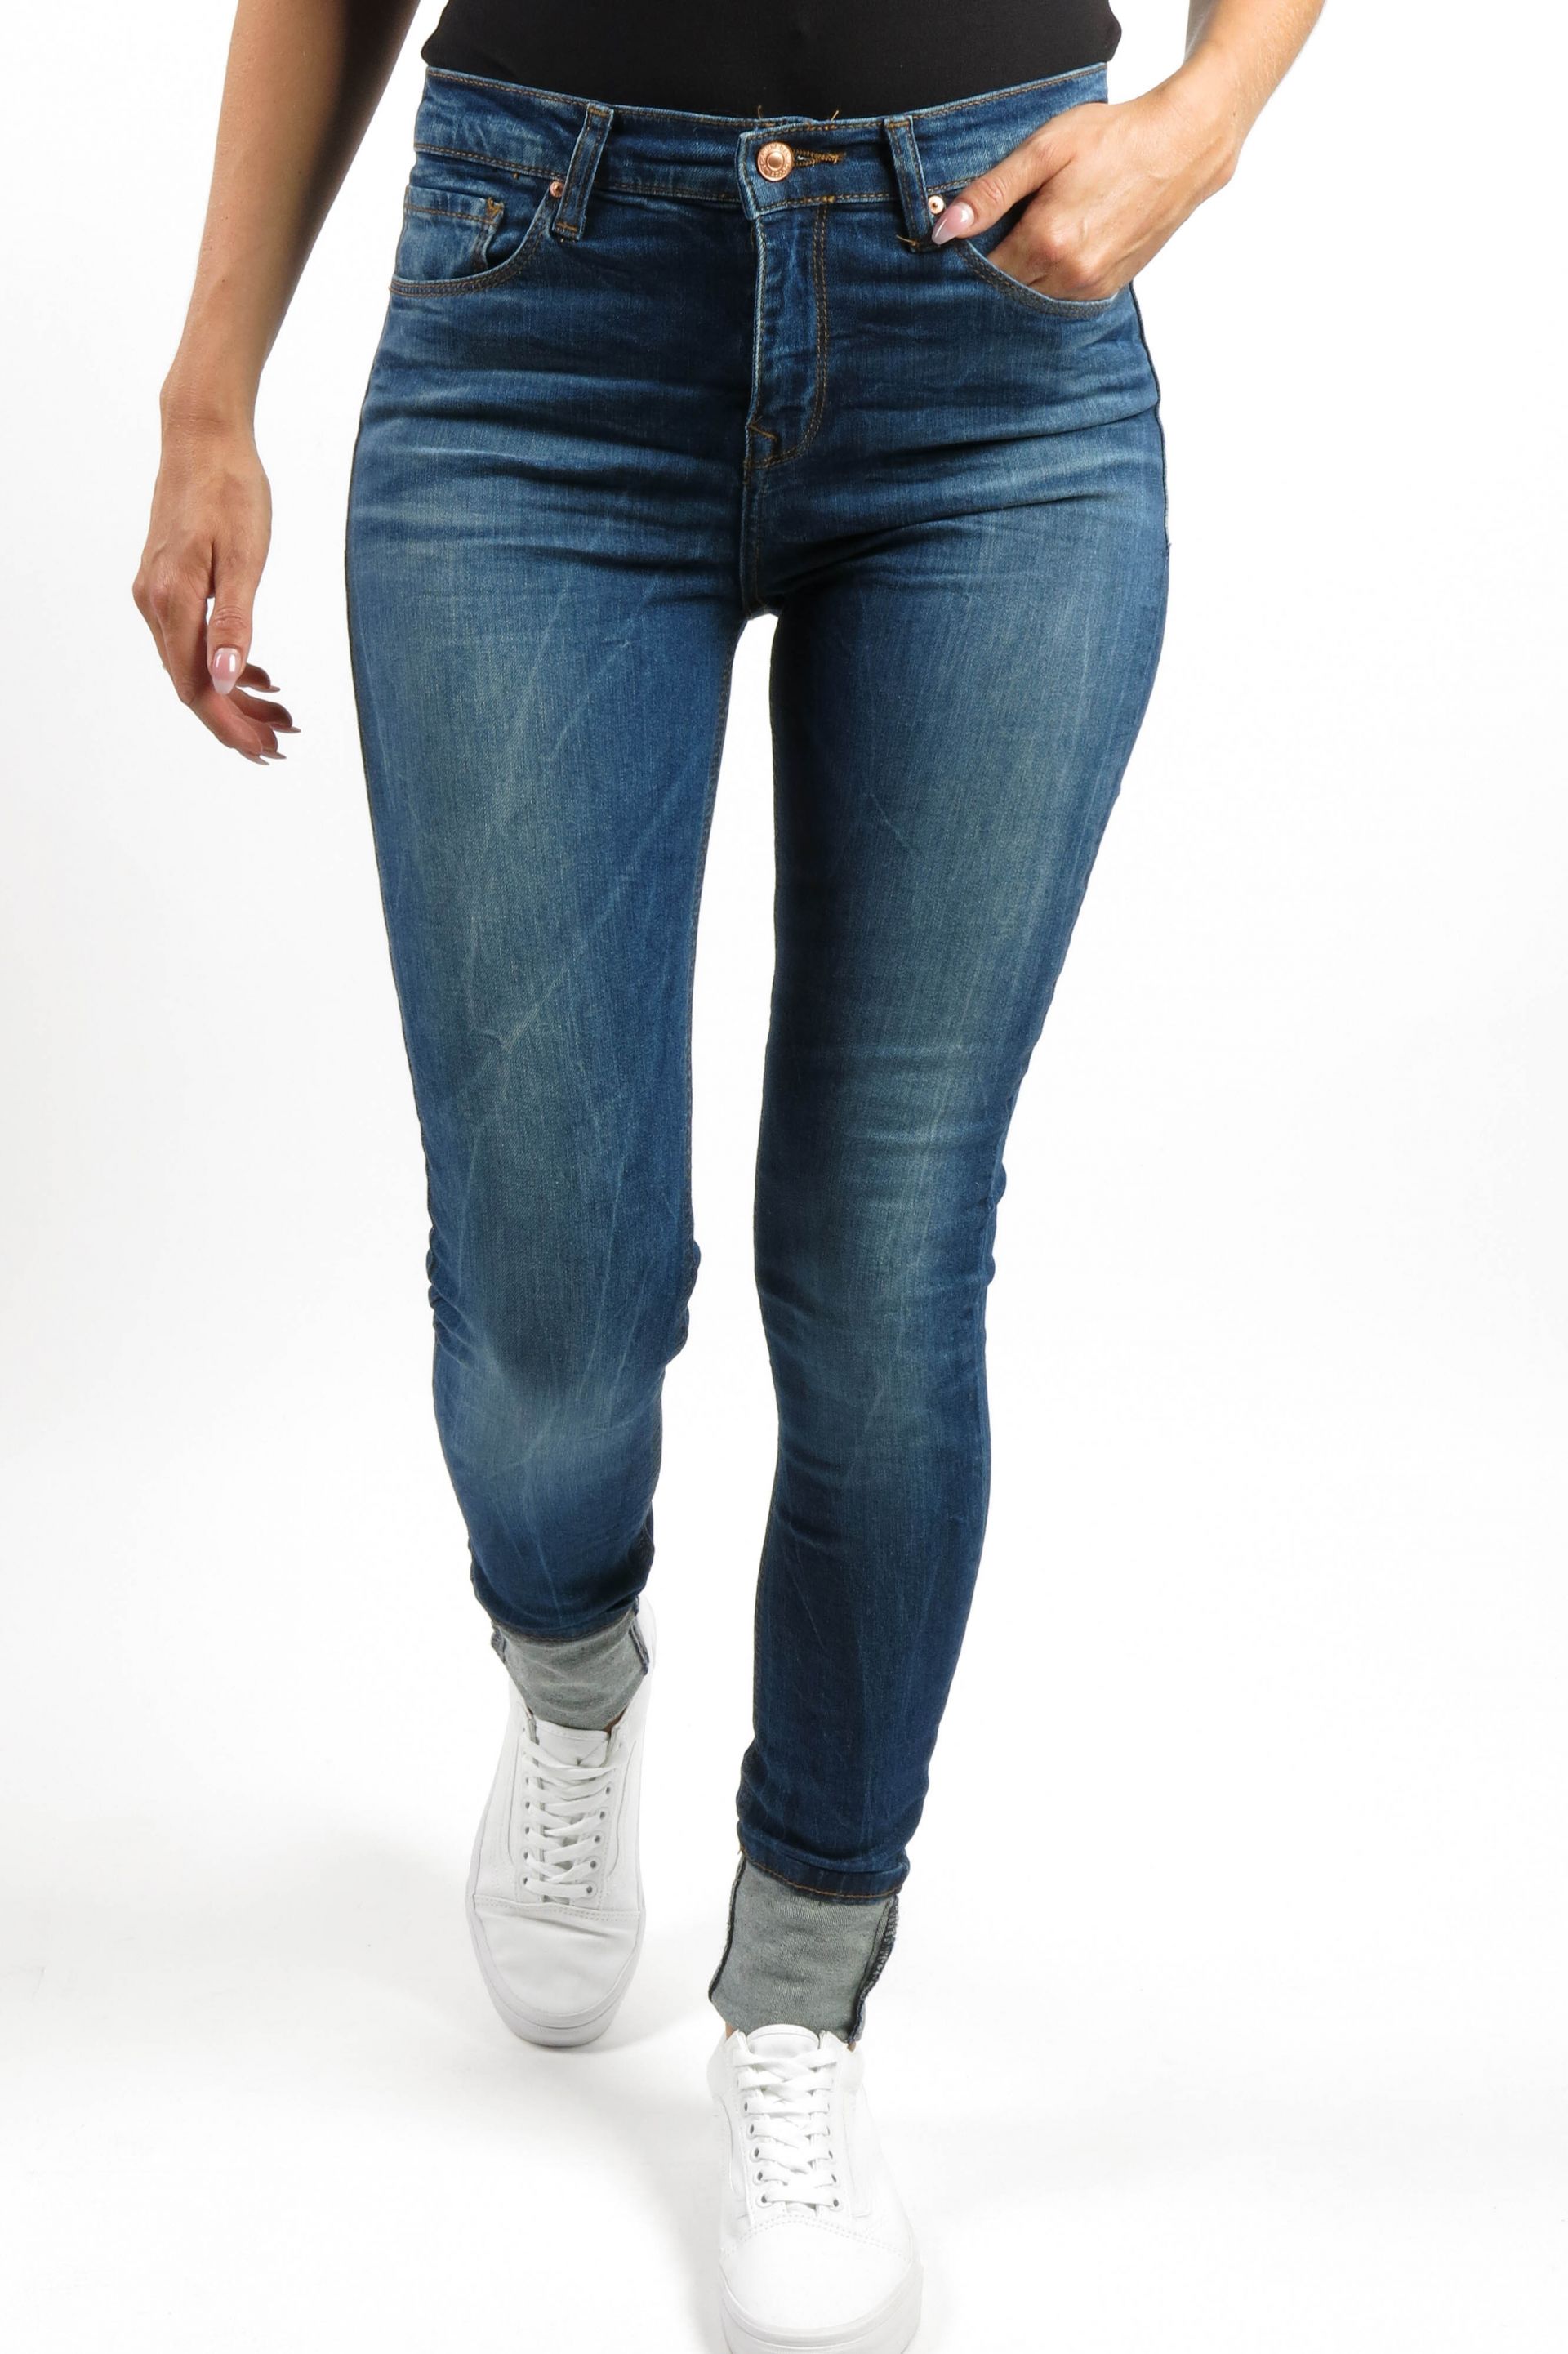 Jeans LTB JEANS 1009-51132-14162-51235